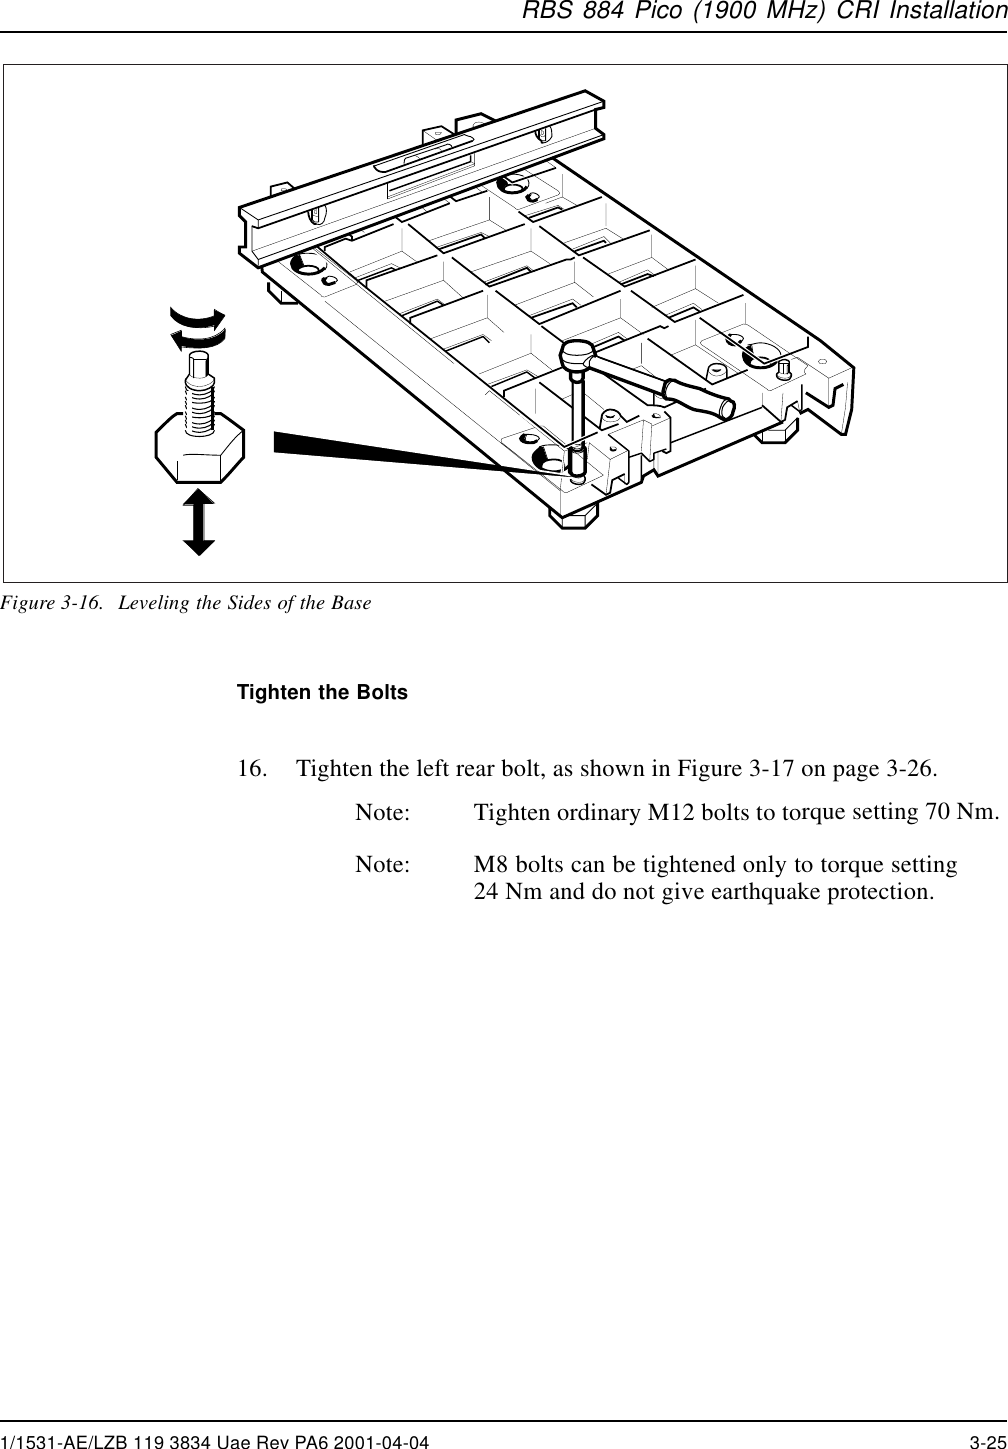 RBS 884 Pico (1900 MHz) CRI InstallationFigure 3-16. Leveling the Sides of the BaseTighten the Bolts16. Tighten the left rear bolt, as shown in Figure 3-17 on page 3-26.Note: Tighten ordinary M12 bolts to torque setting 70 Nm.Note: M8 bolts can be tightened only to torque setting24 Nm and do not give earthquake protection.1/1531-AE/LZB 119 3834 Uae Rev PA6 2001-04-04 3-25